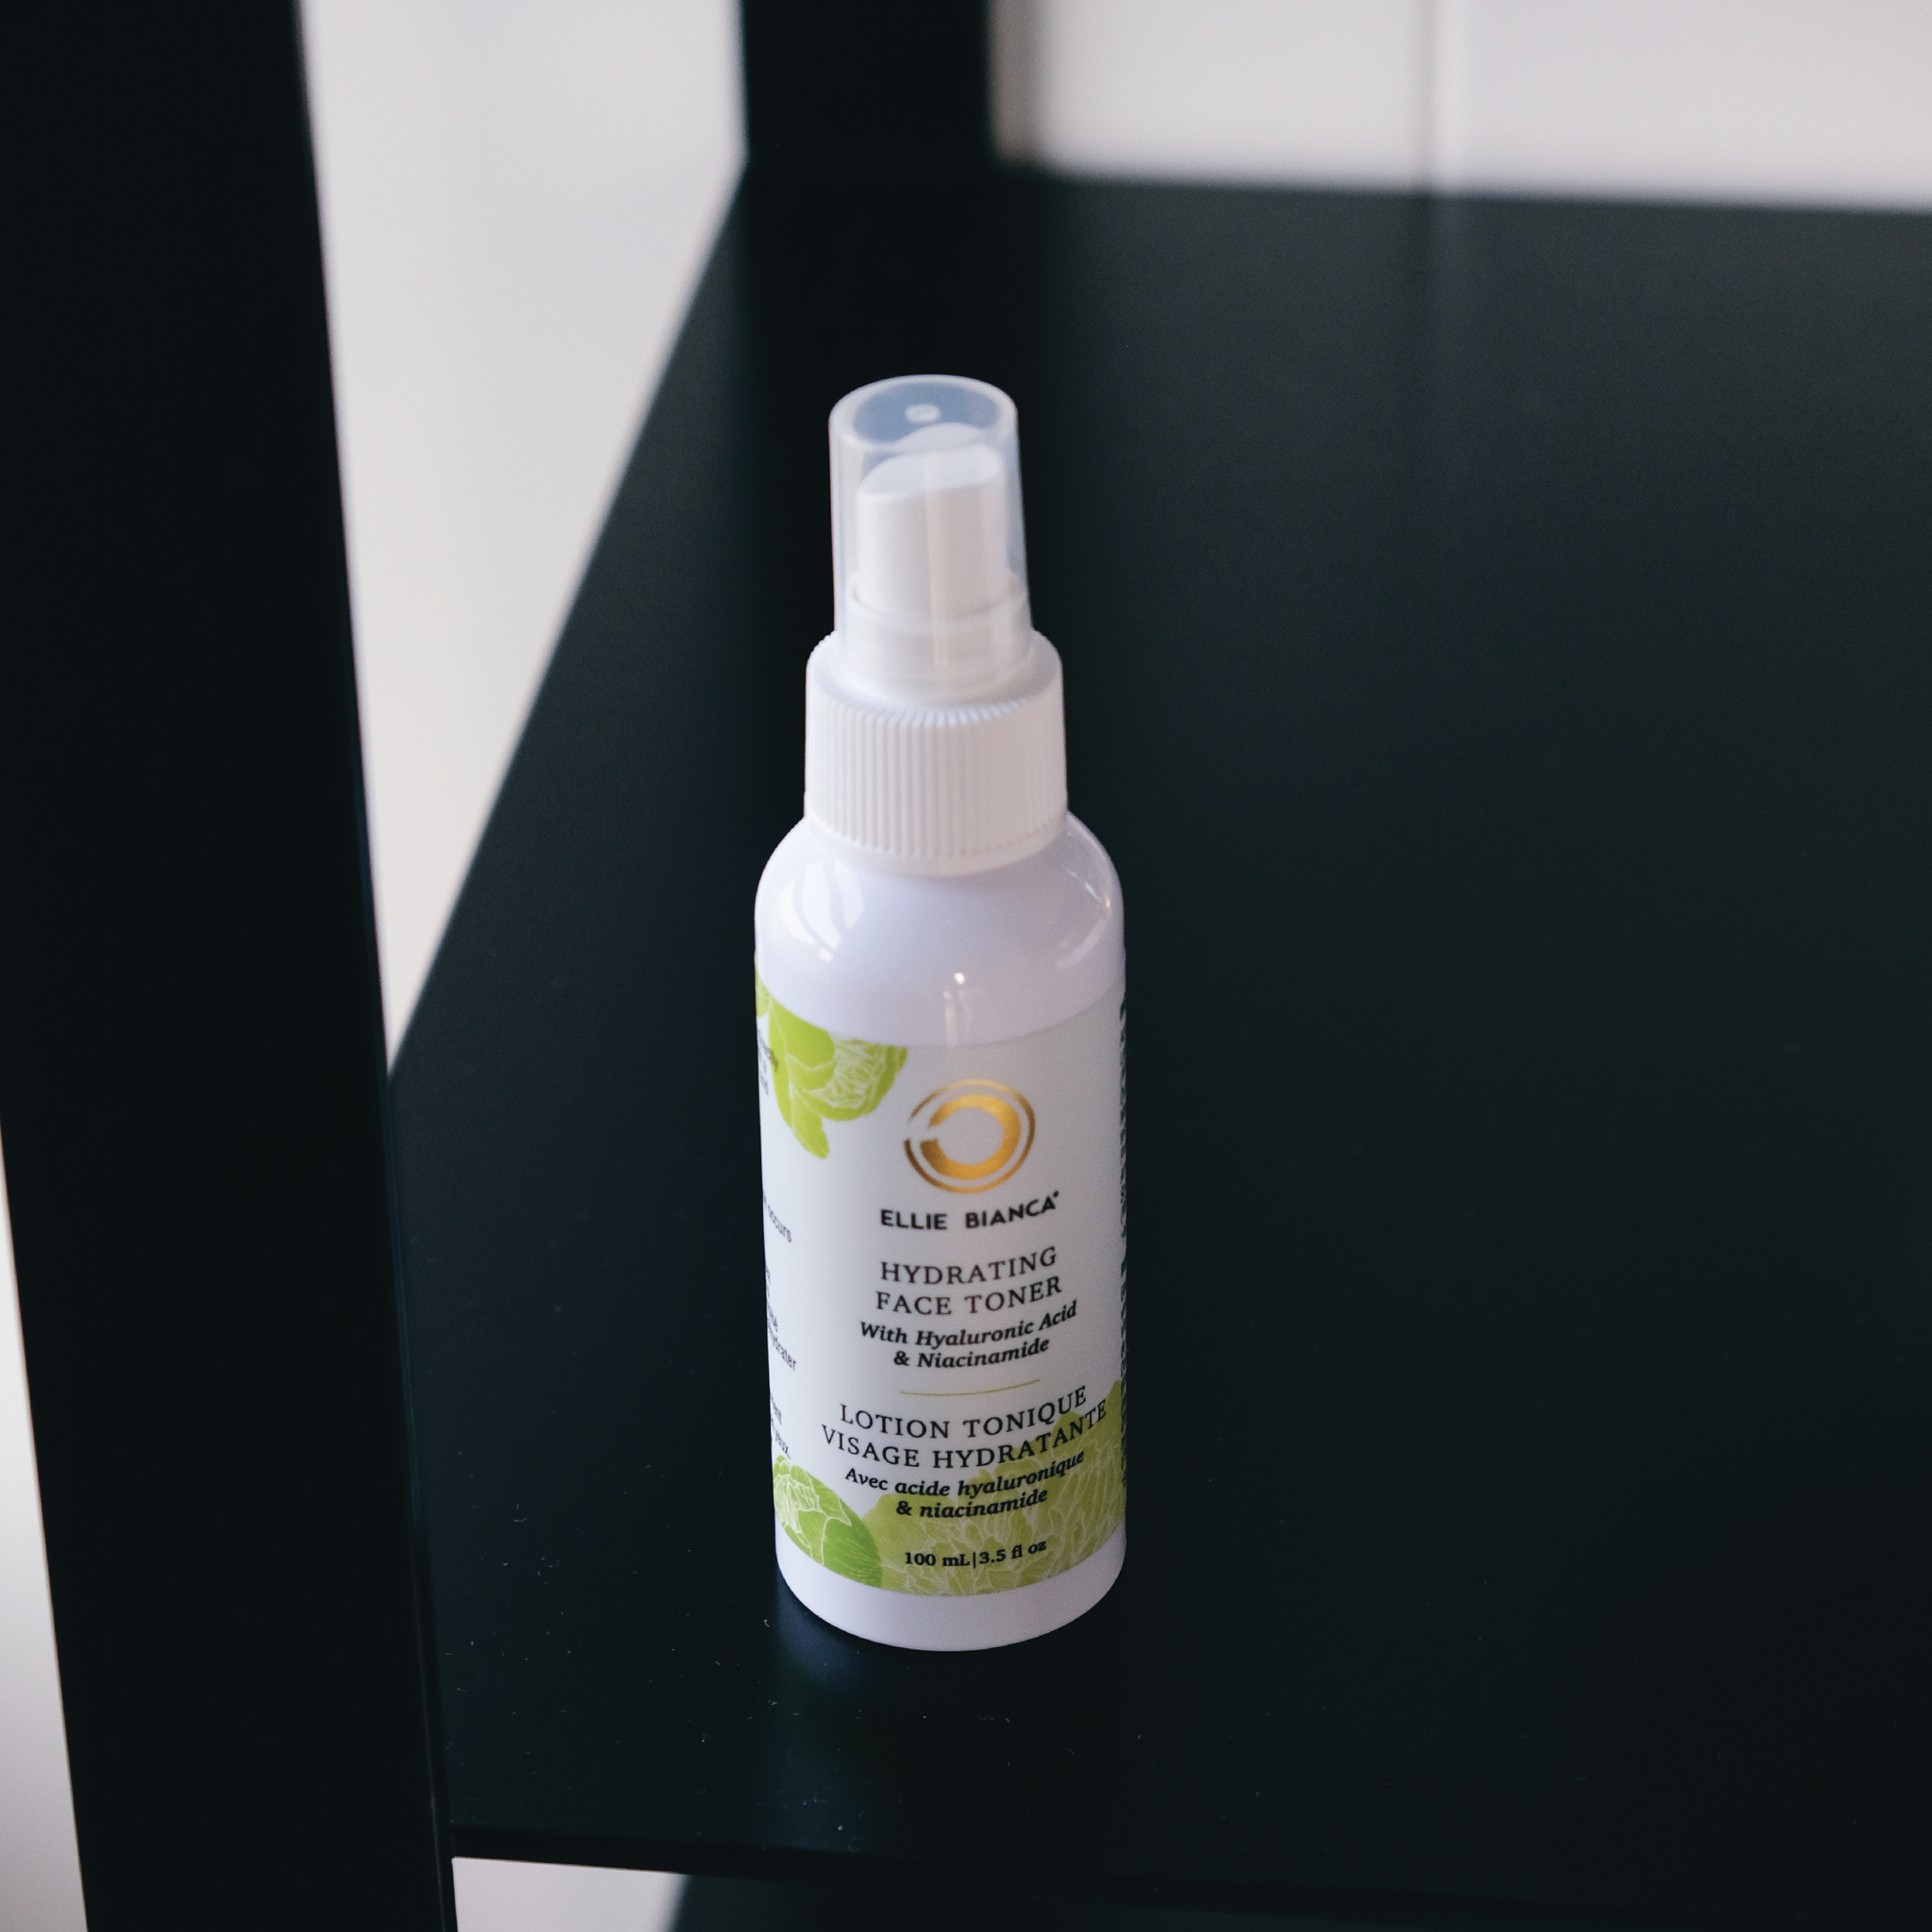 Hydrating Face Toner with Hyaluronic Acid and Niacinamide